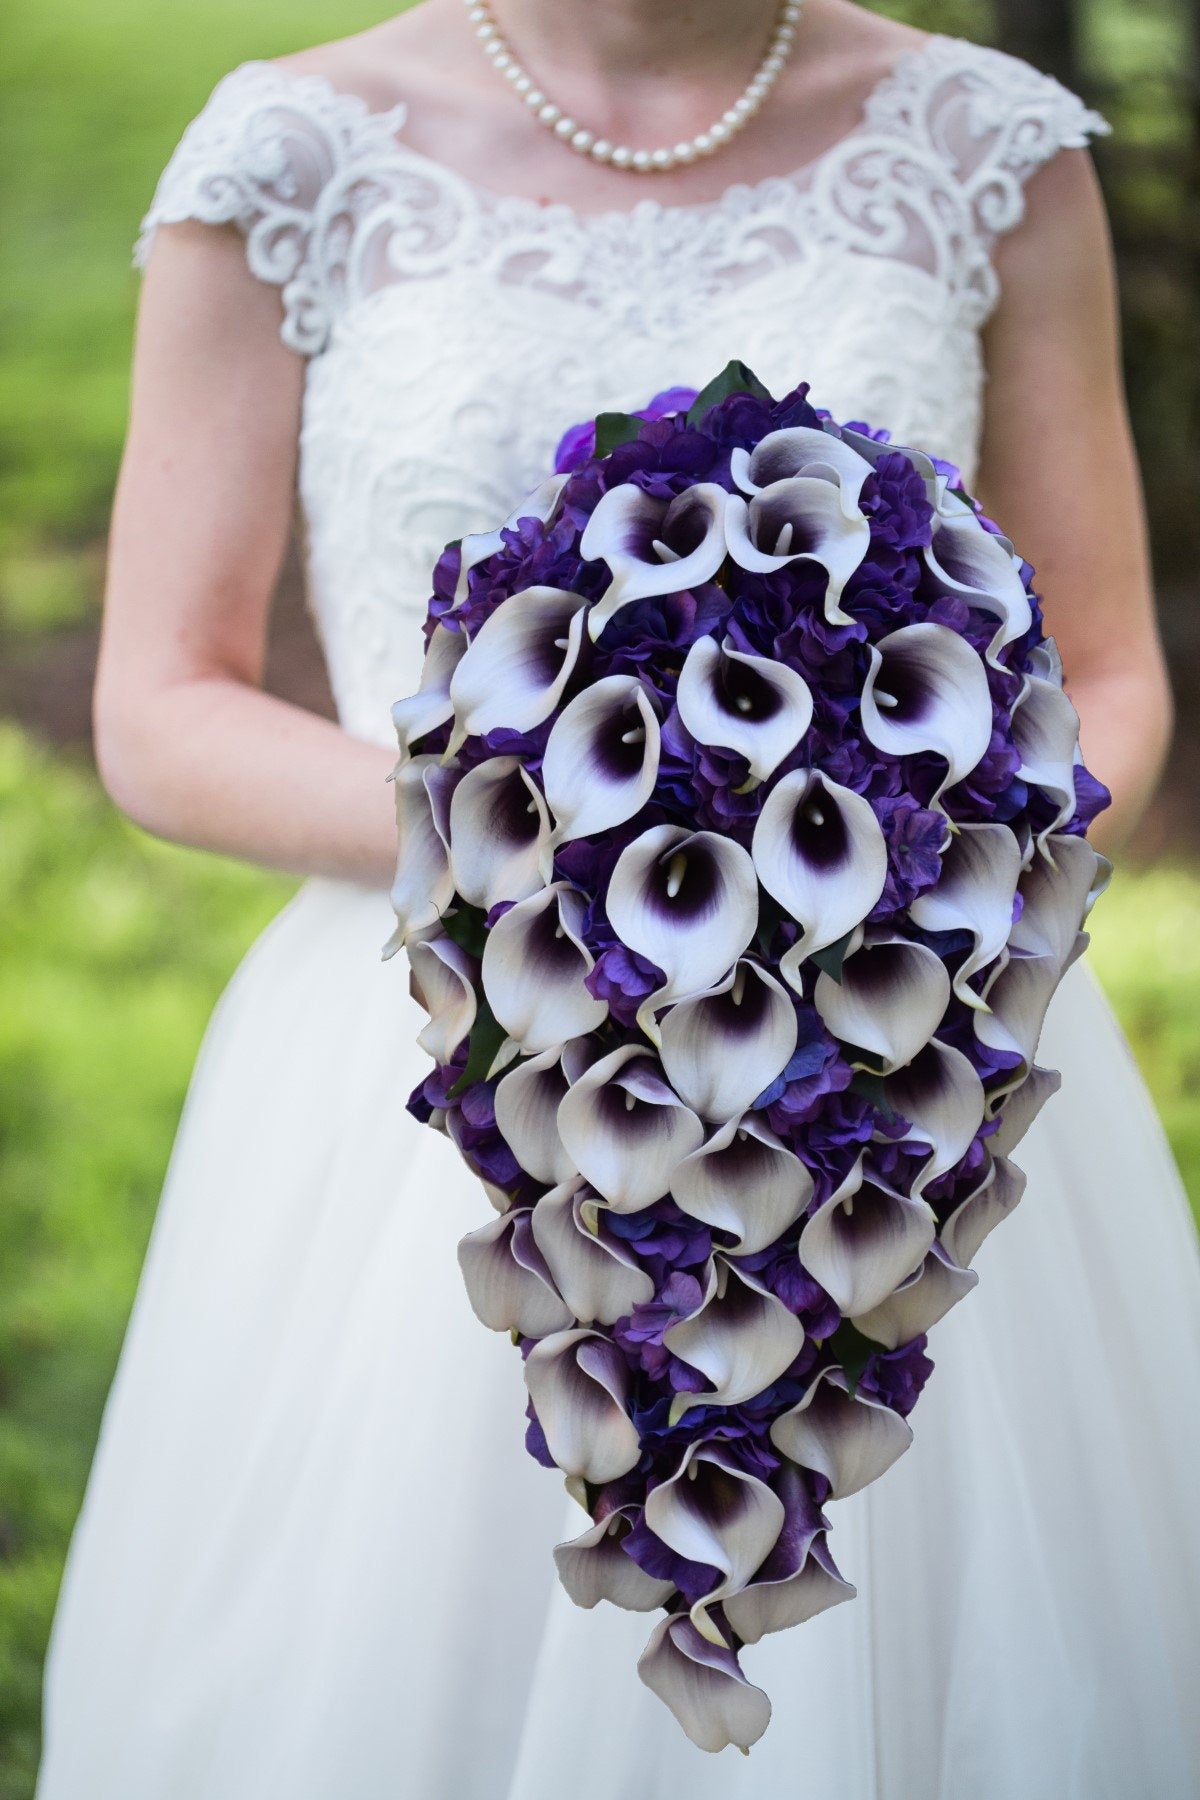 Real Touch Picasso Calla Lily Purple Hydrangea Bridal or Bridesmaid Bouquet - Add Groom's or Groomsmen Boutonniere - Purple Wedding Bouquet